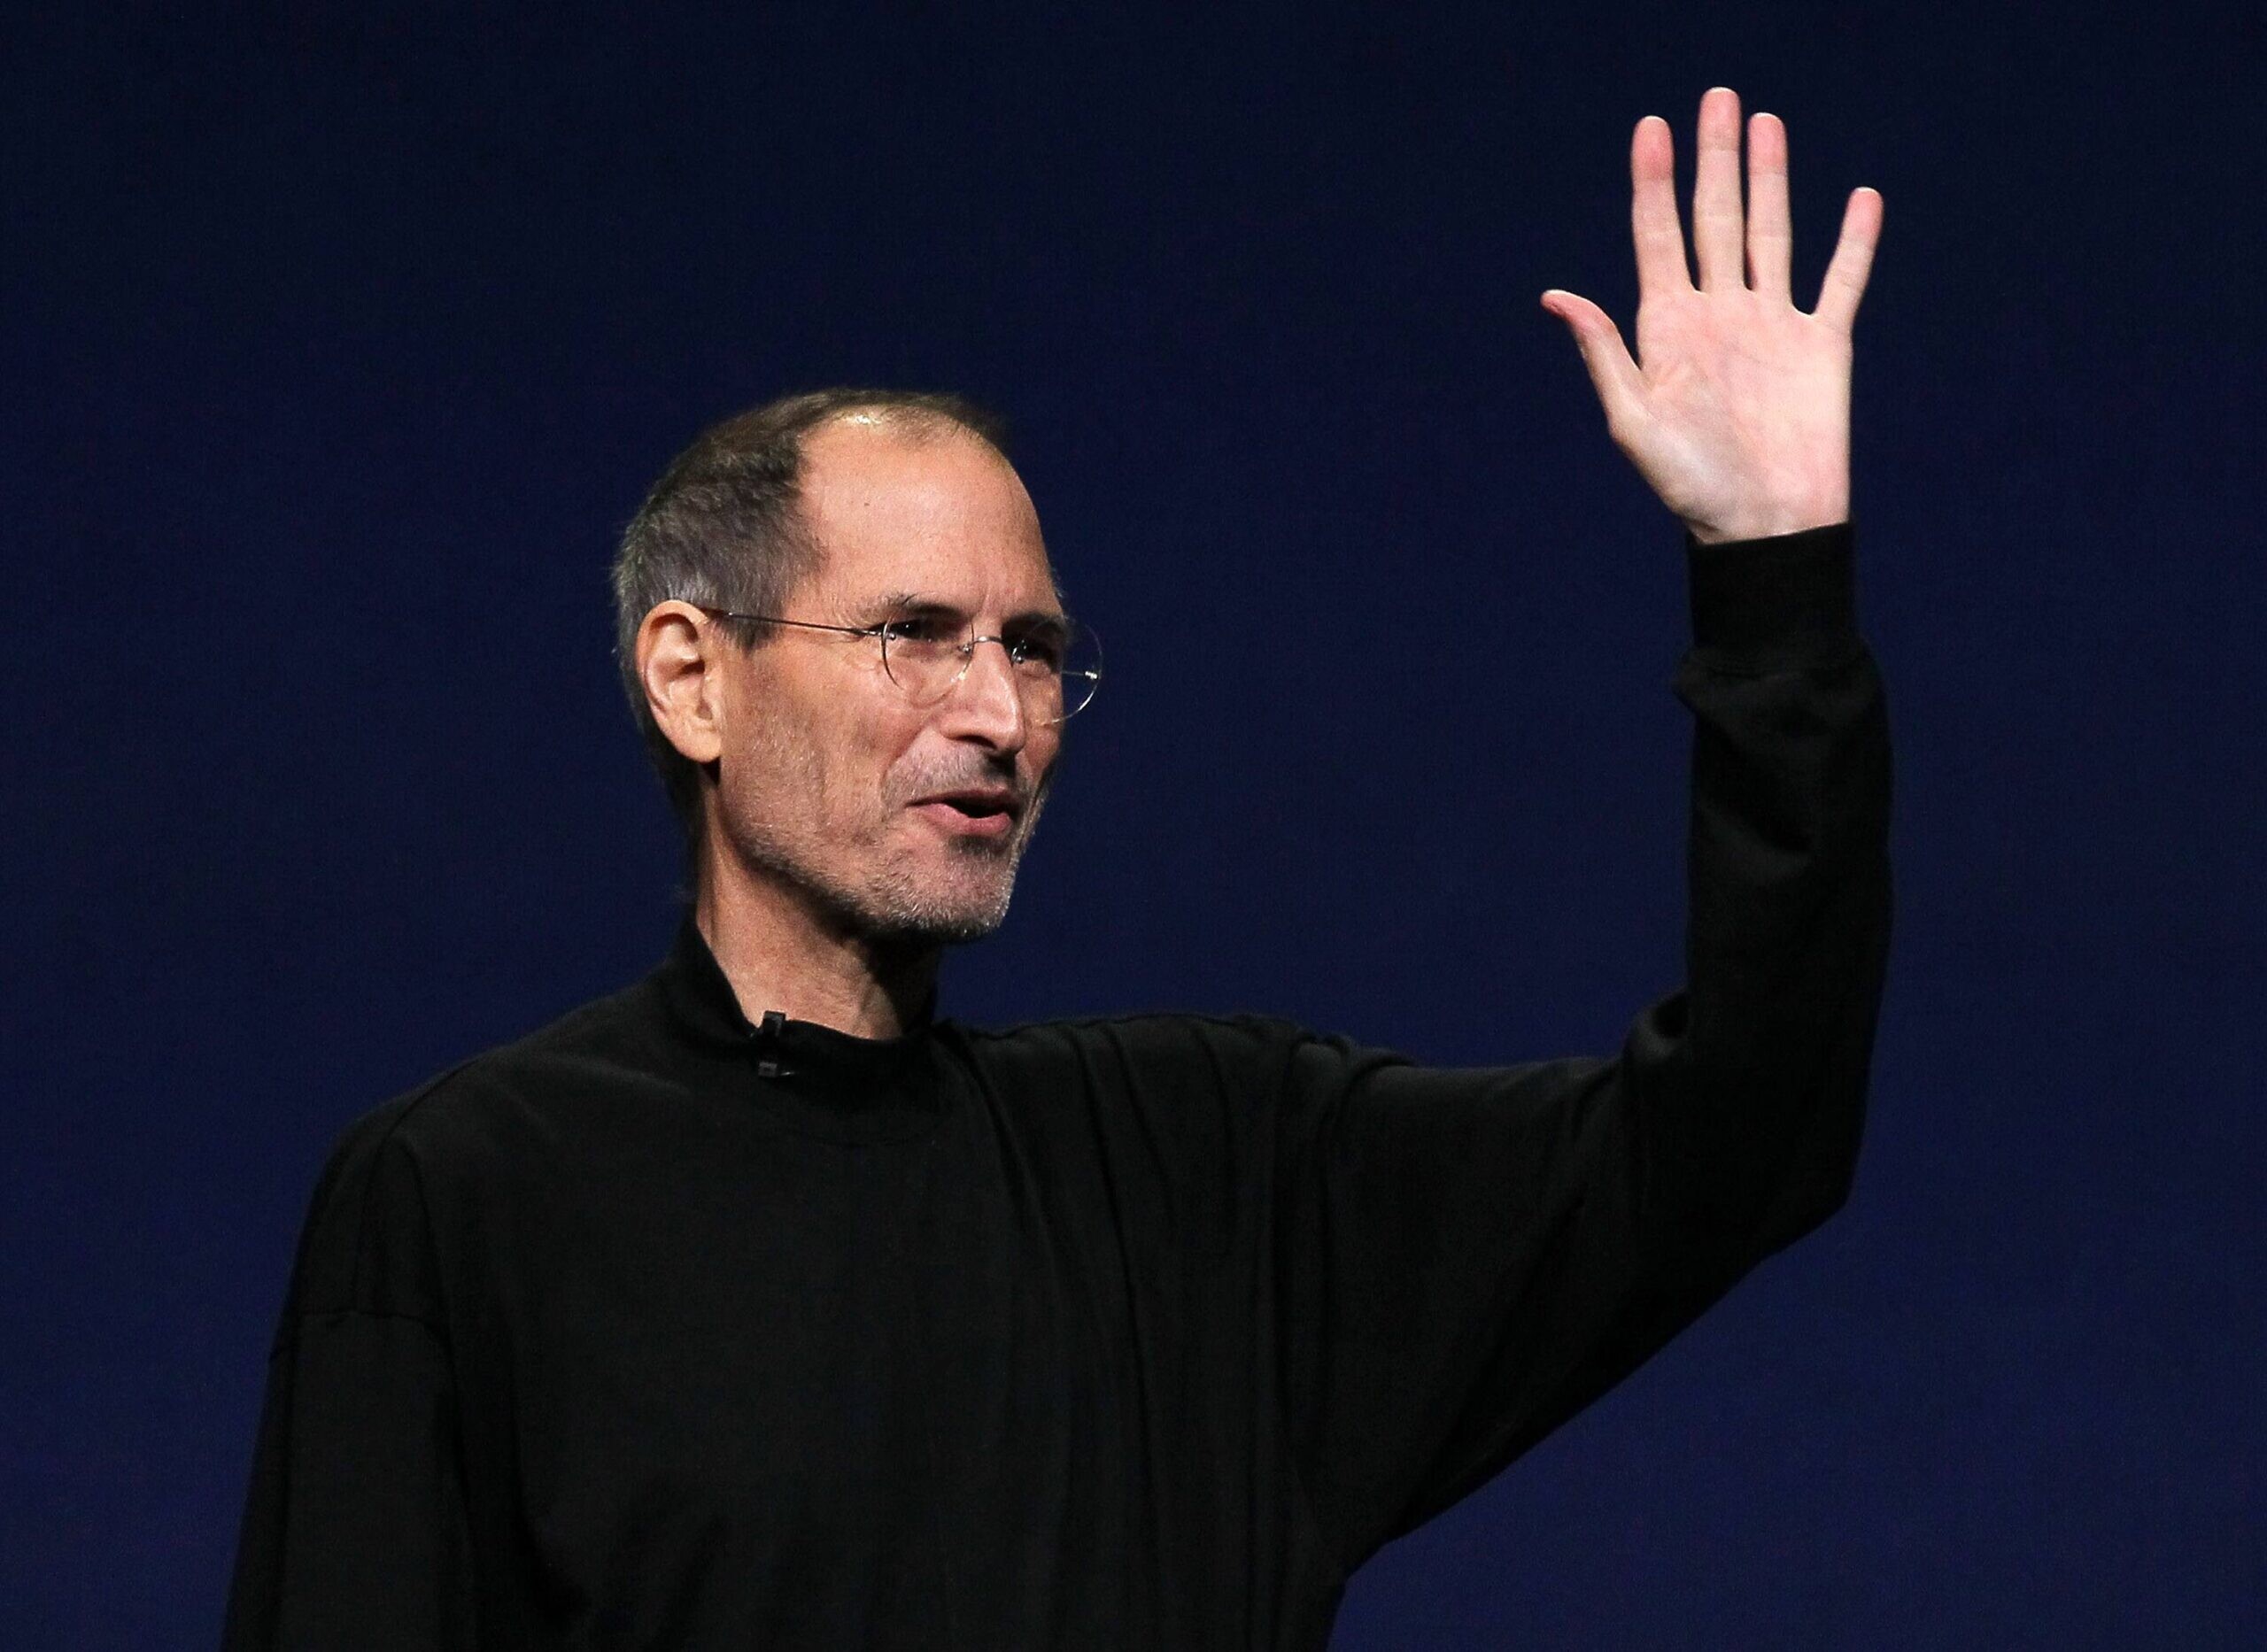 what is the middle name of steve jobs - solsarin